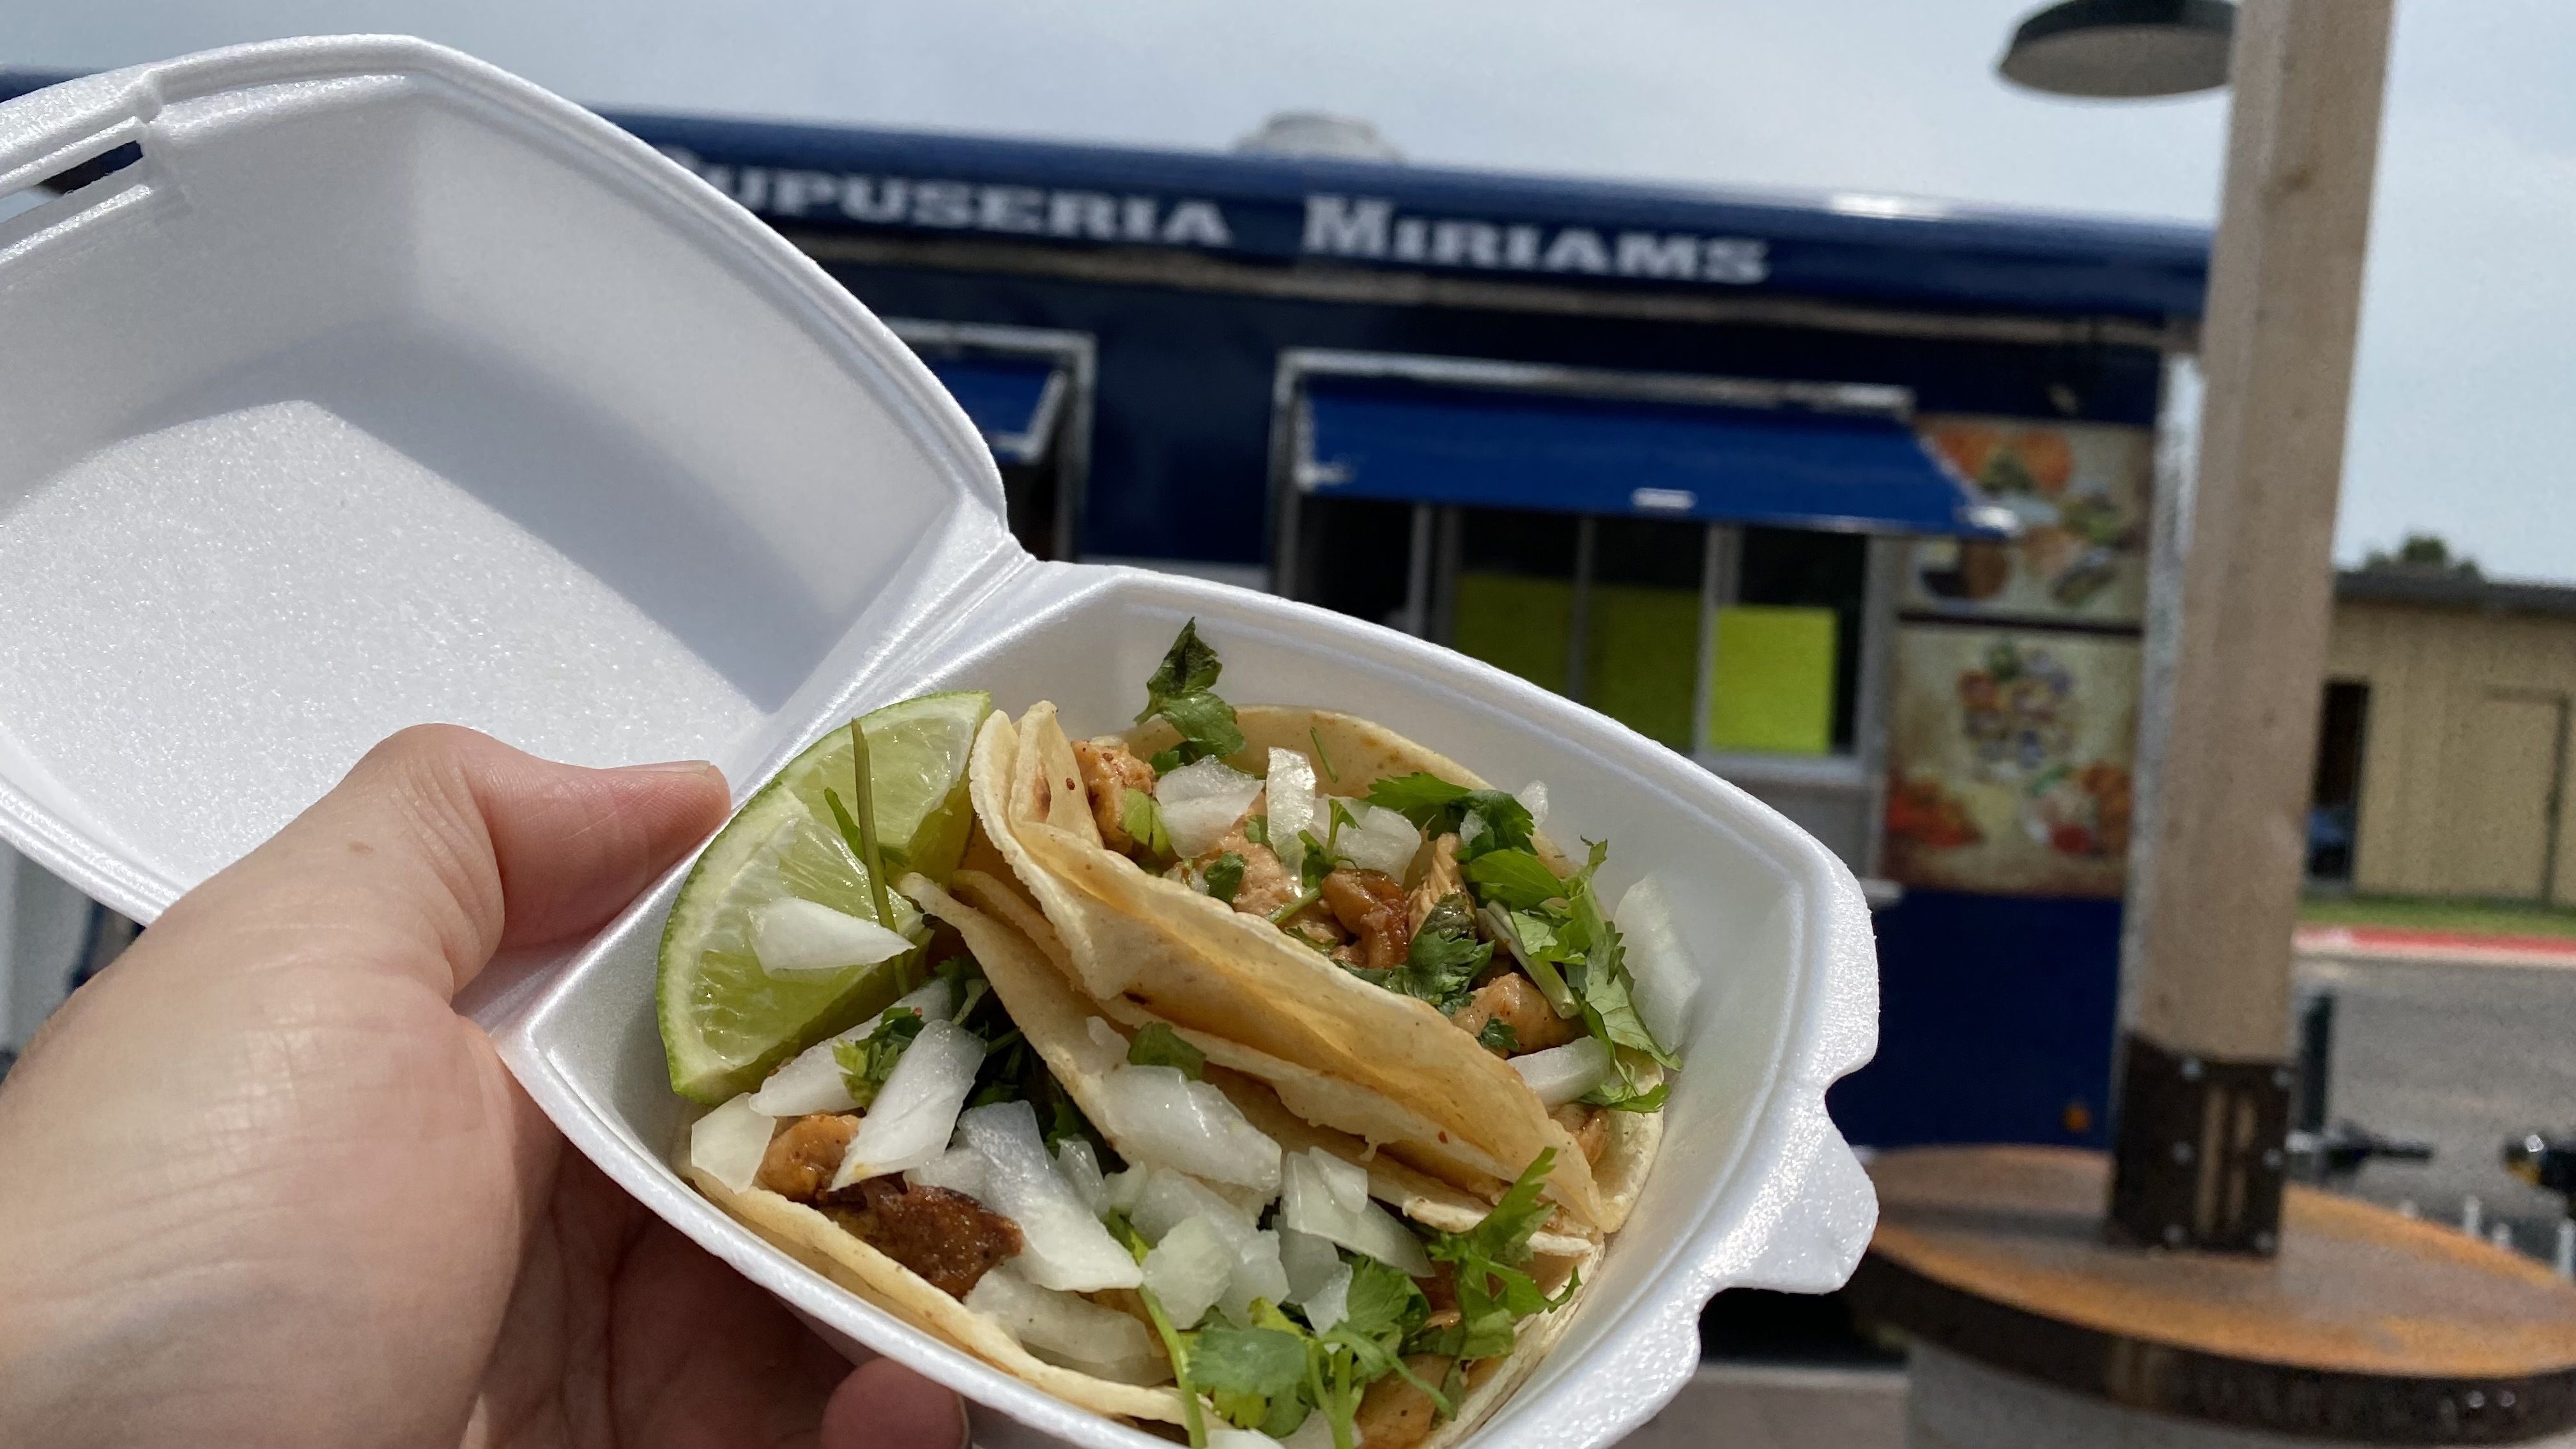 A photo of street tacos.